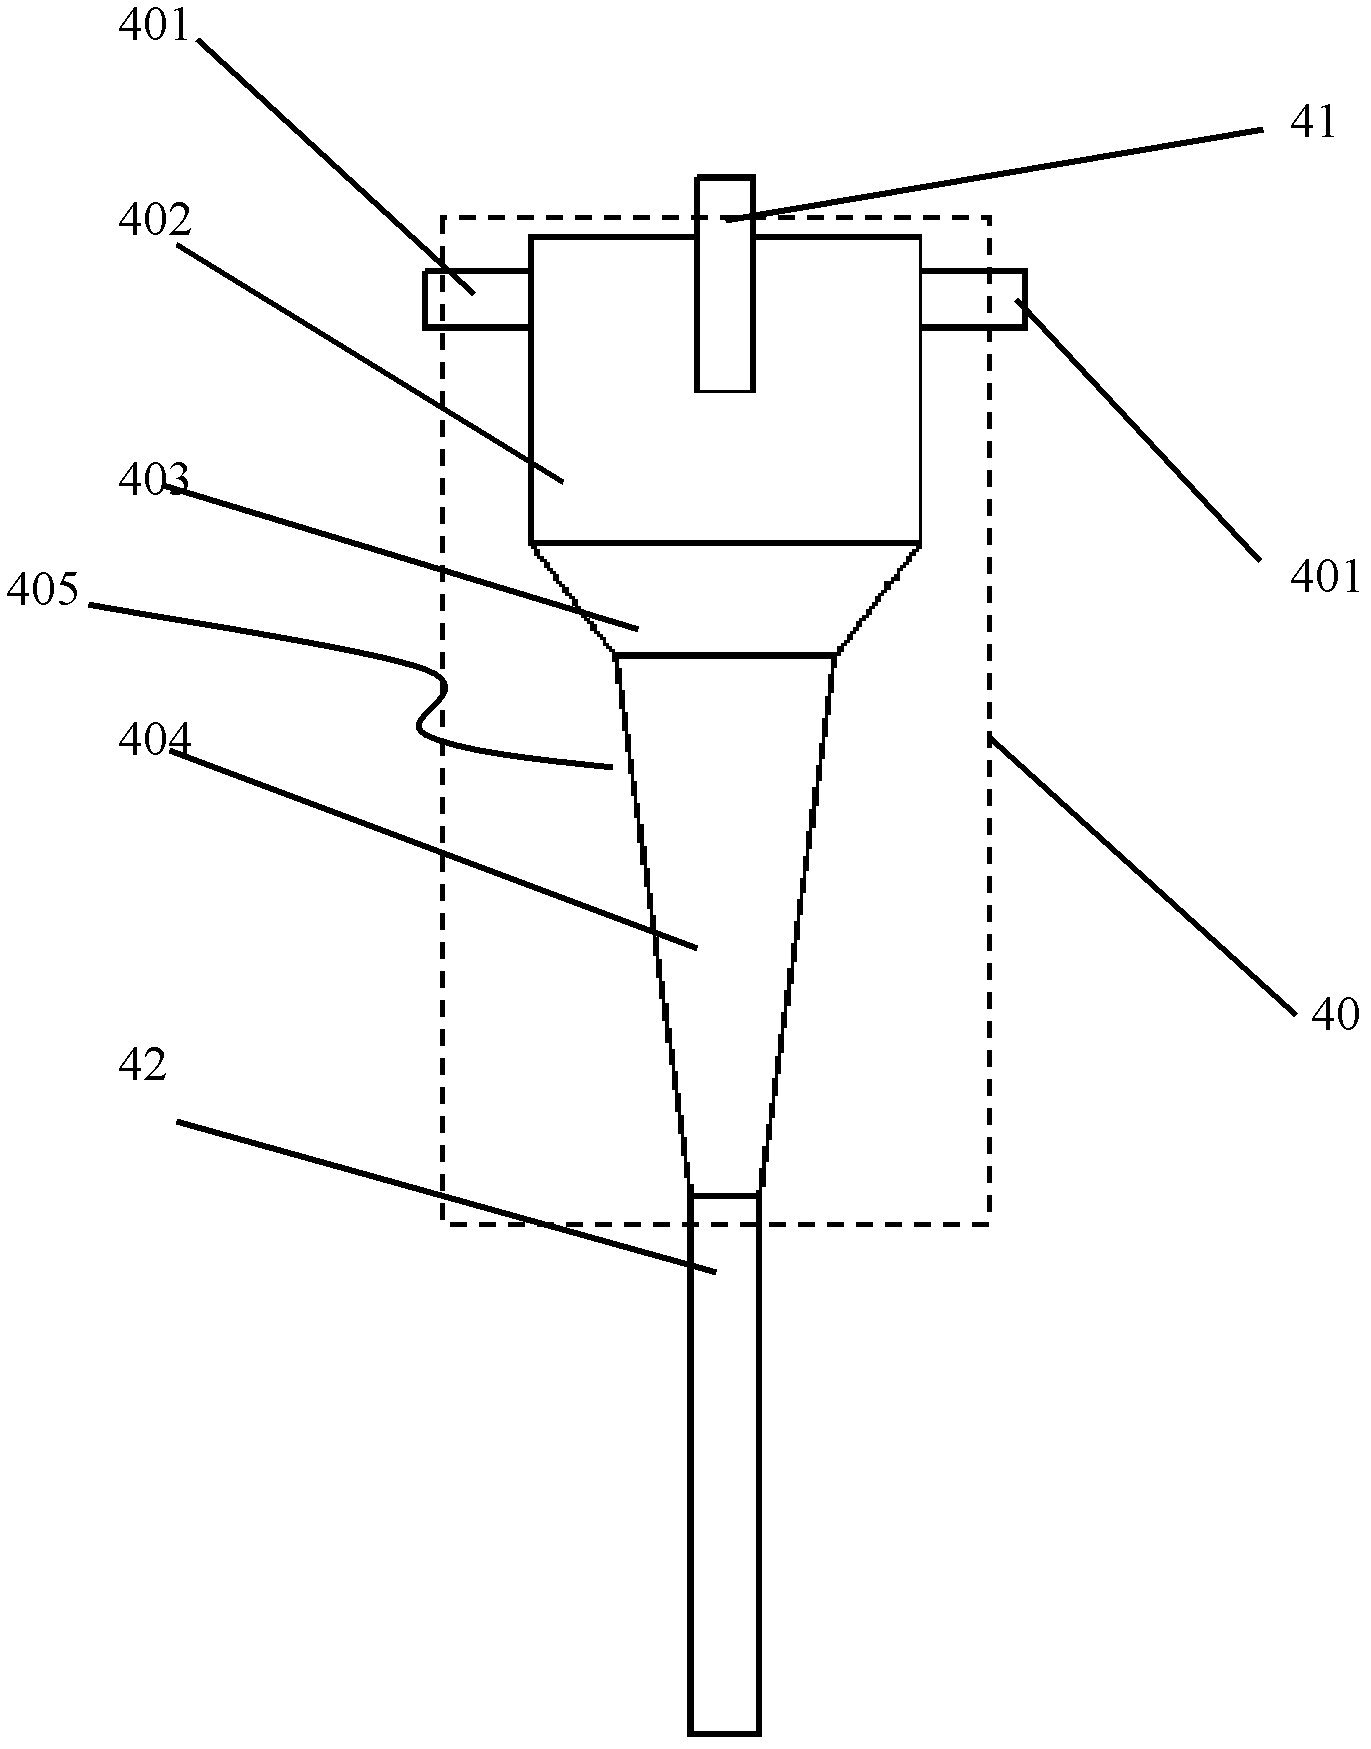 Treatment method and equipment for oilfield produced water